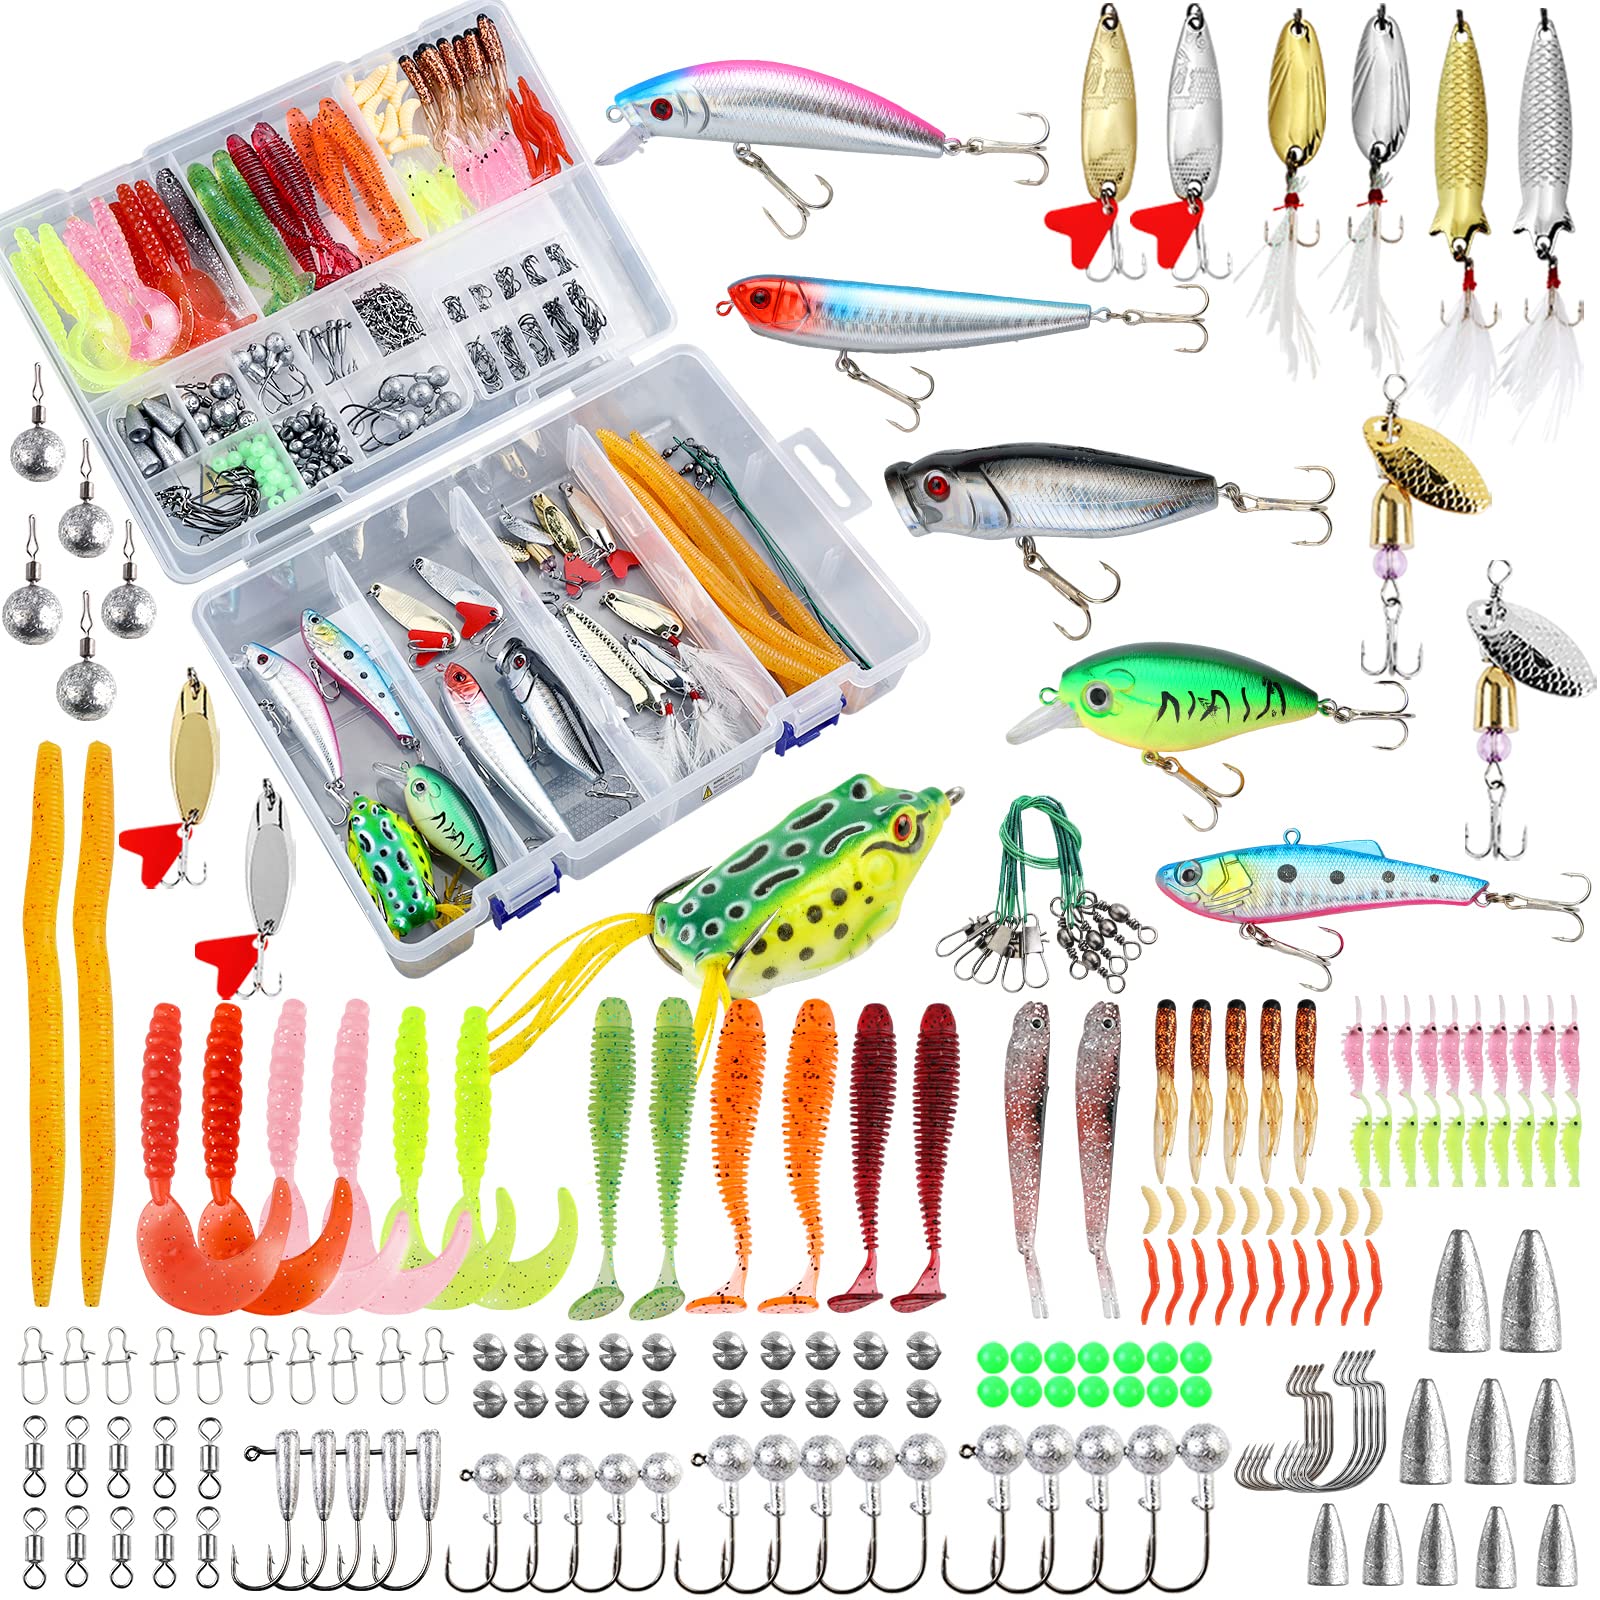 Songway Fishing Lure Kits Soft Lure Set Mixed Universal Assorted Fishing  Baits Kit for Saltwater and Freshwater With Tackle Box